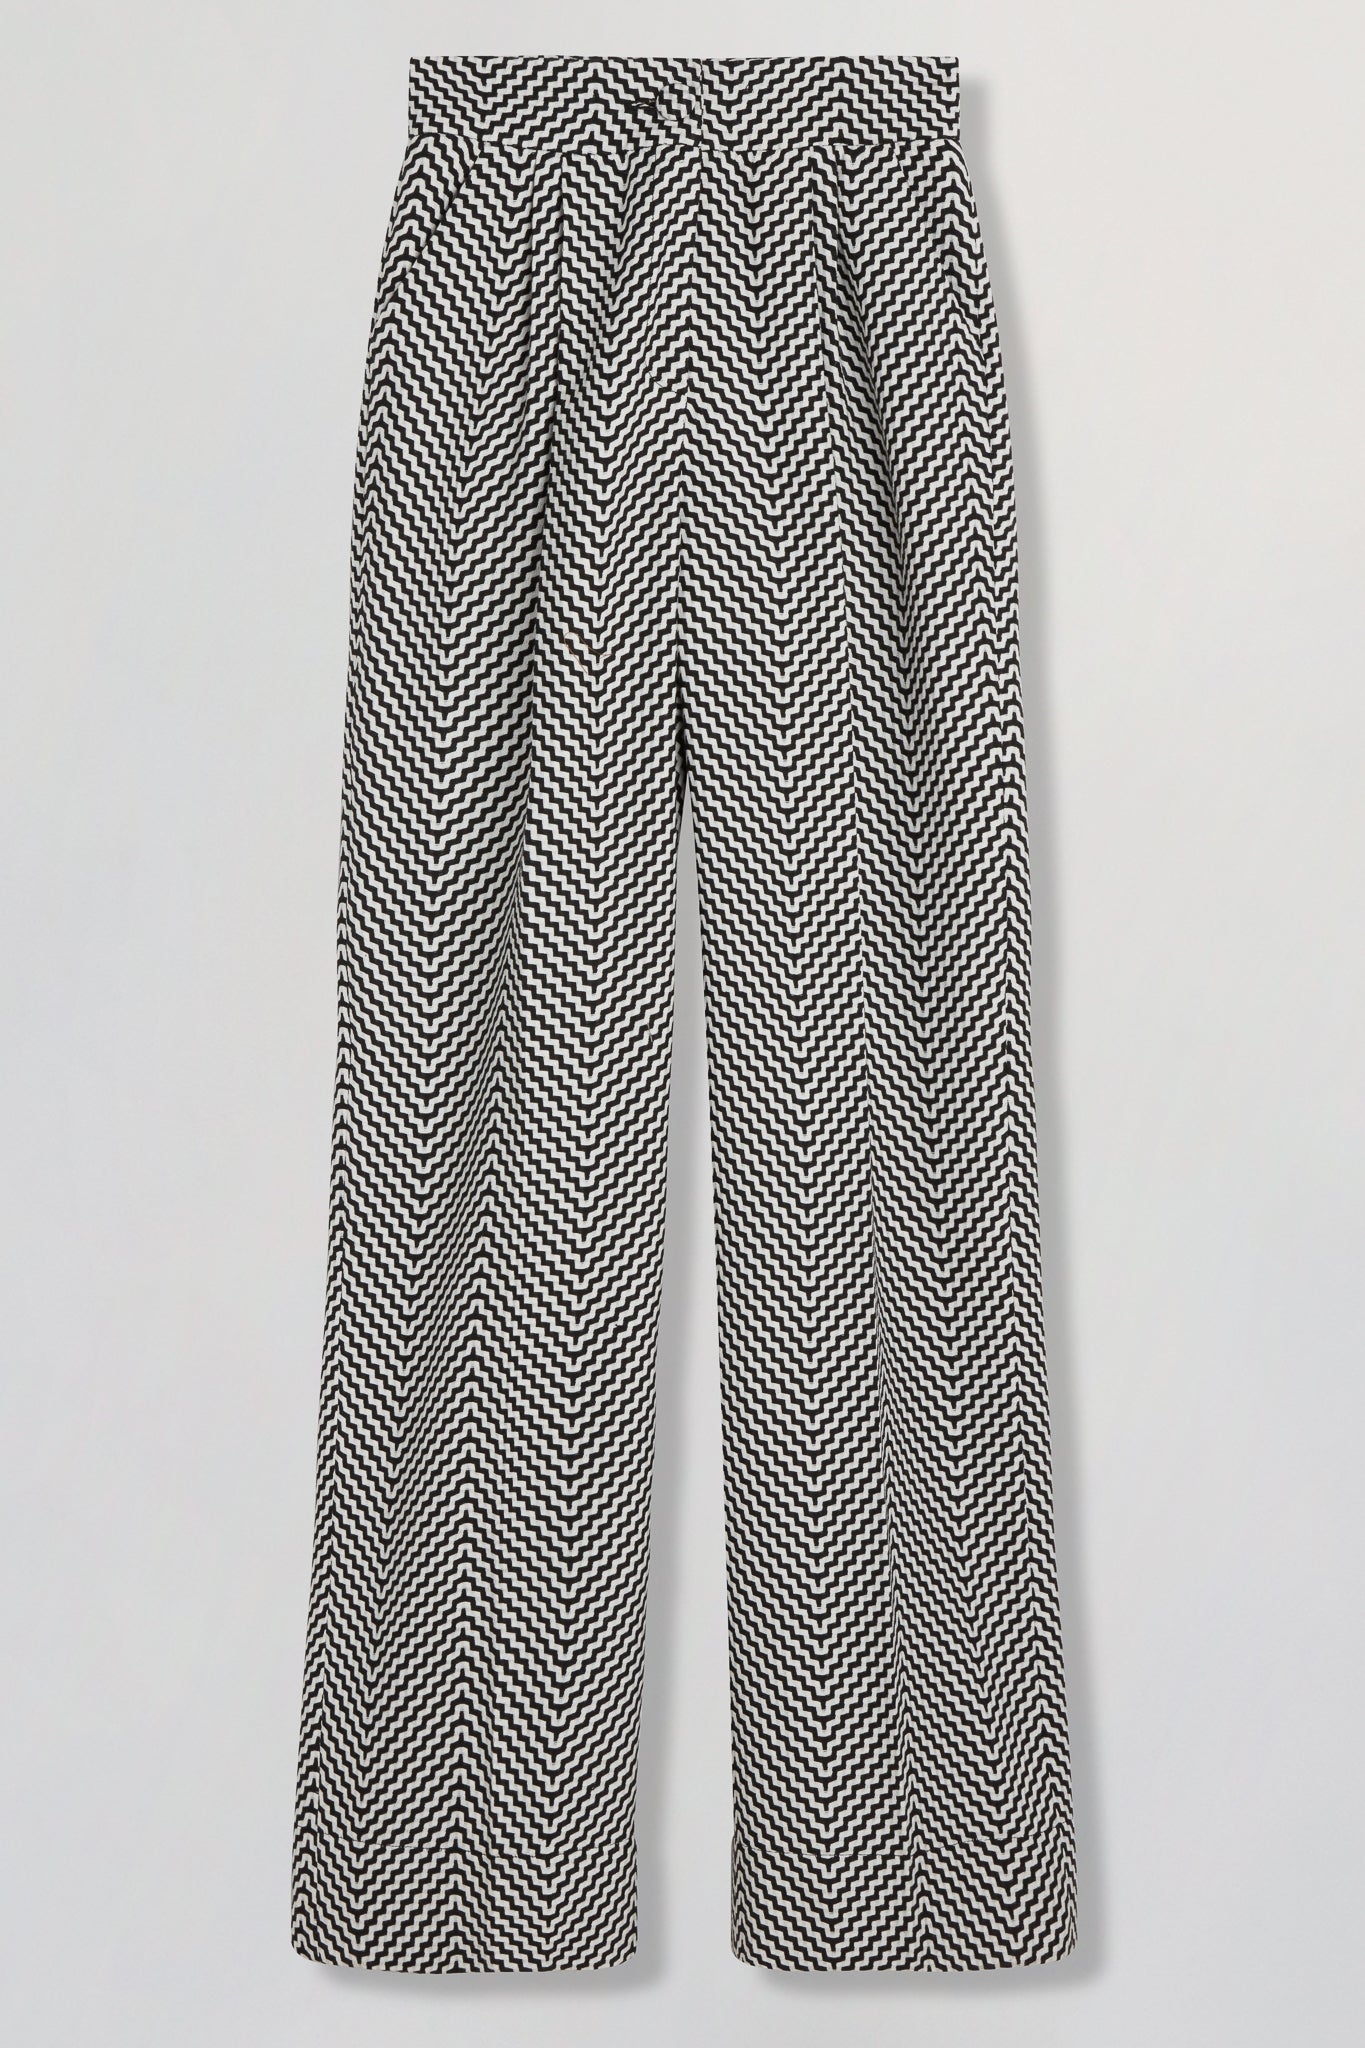 High waist wide leg pants in black and white